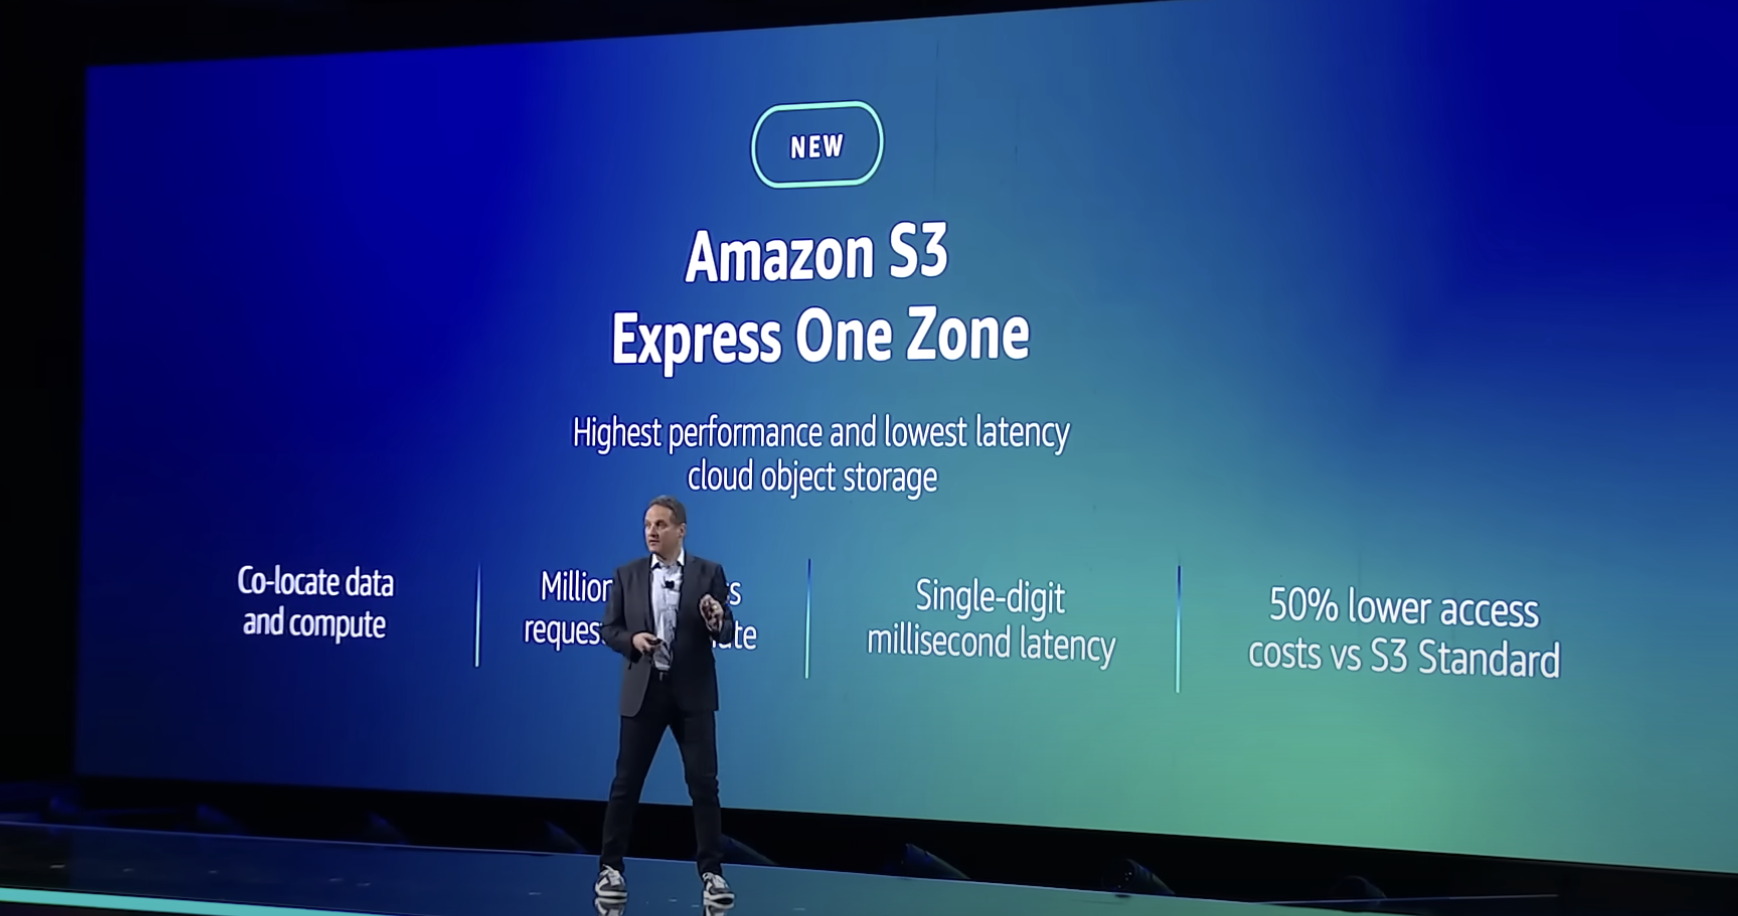 Cover Image for Amazon S3 Express One Zone触ってみた